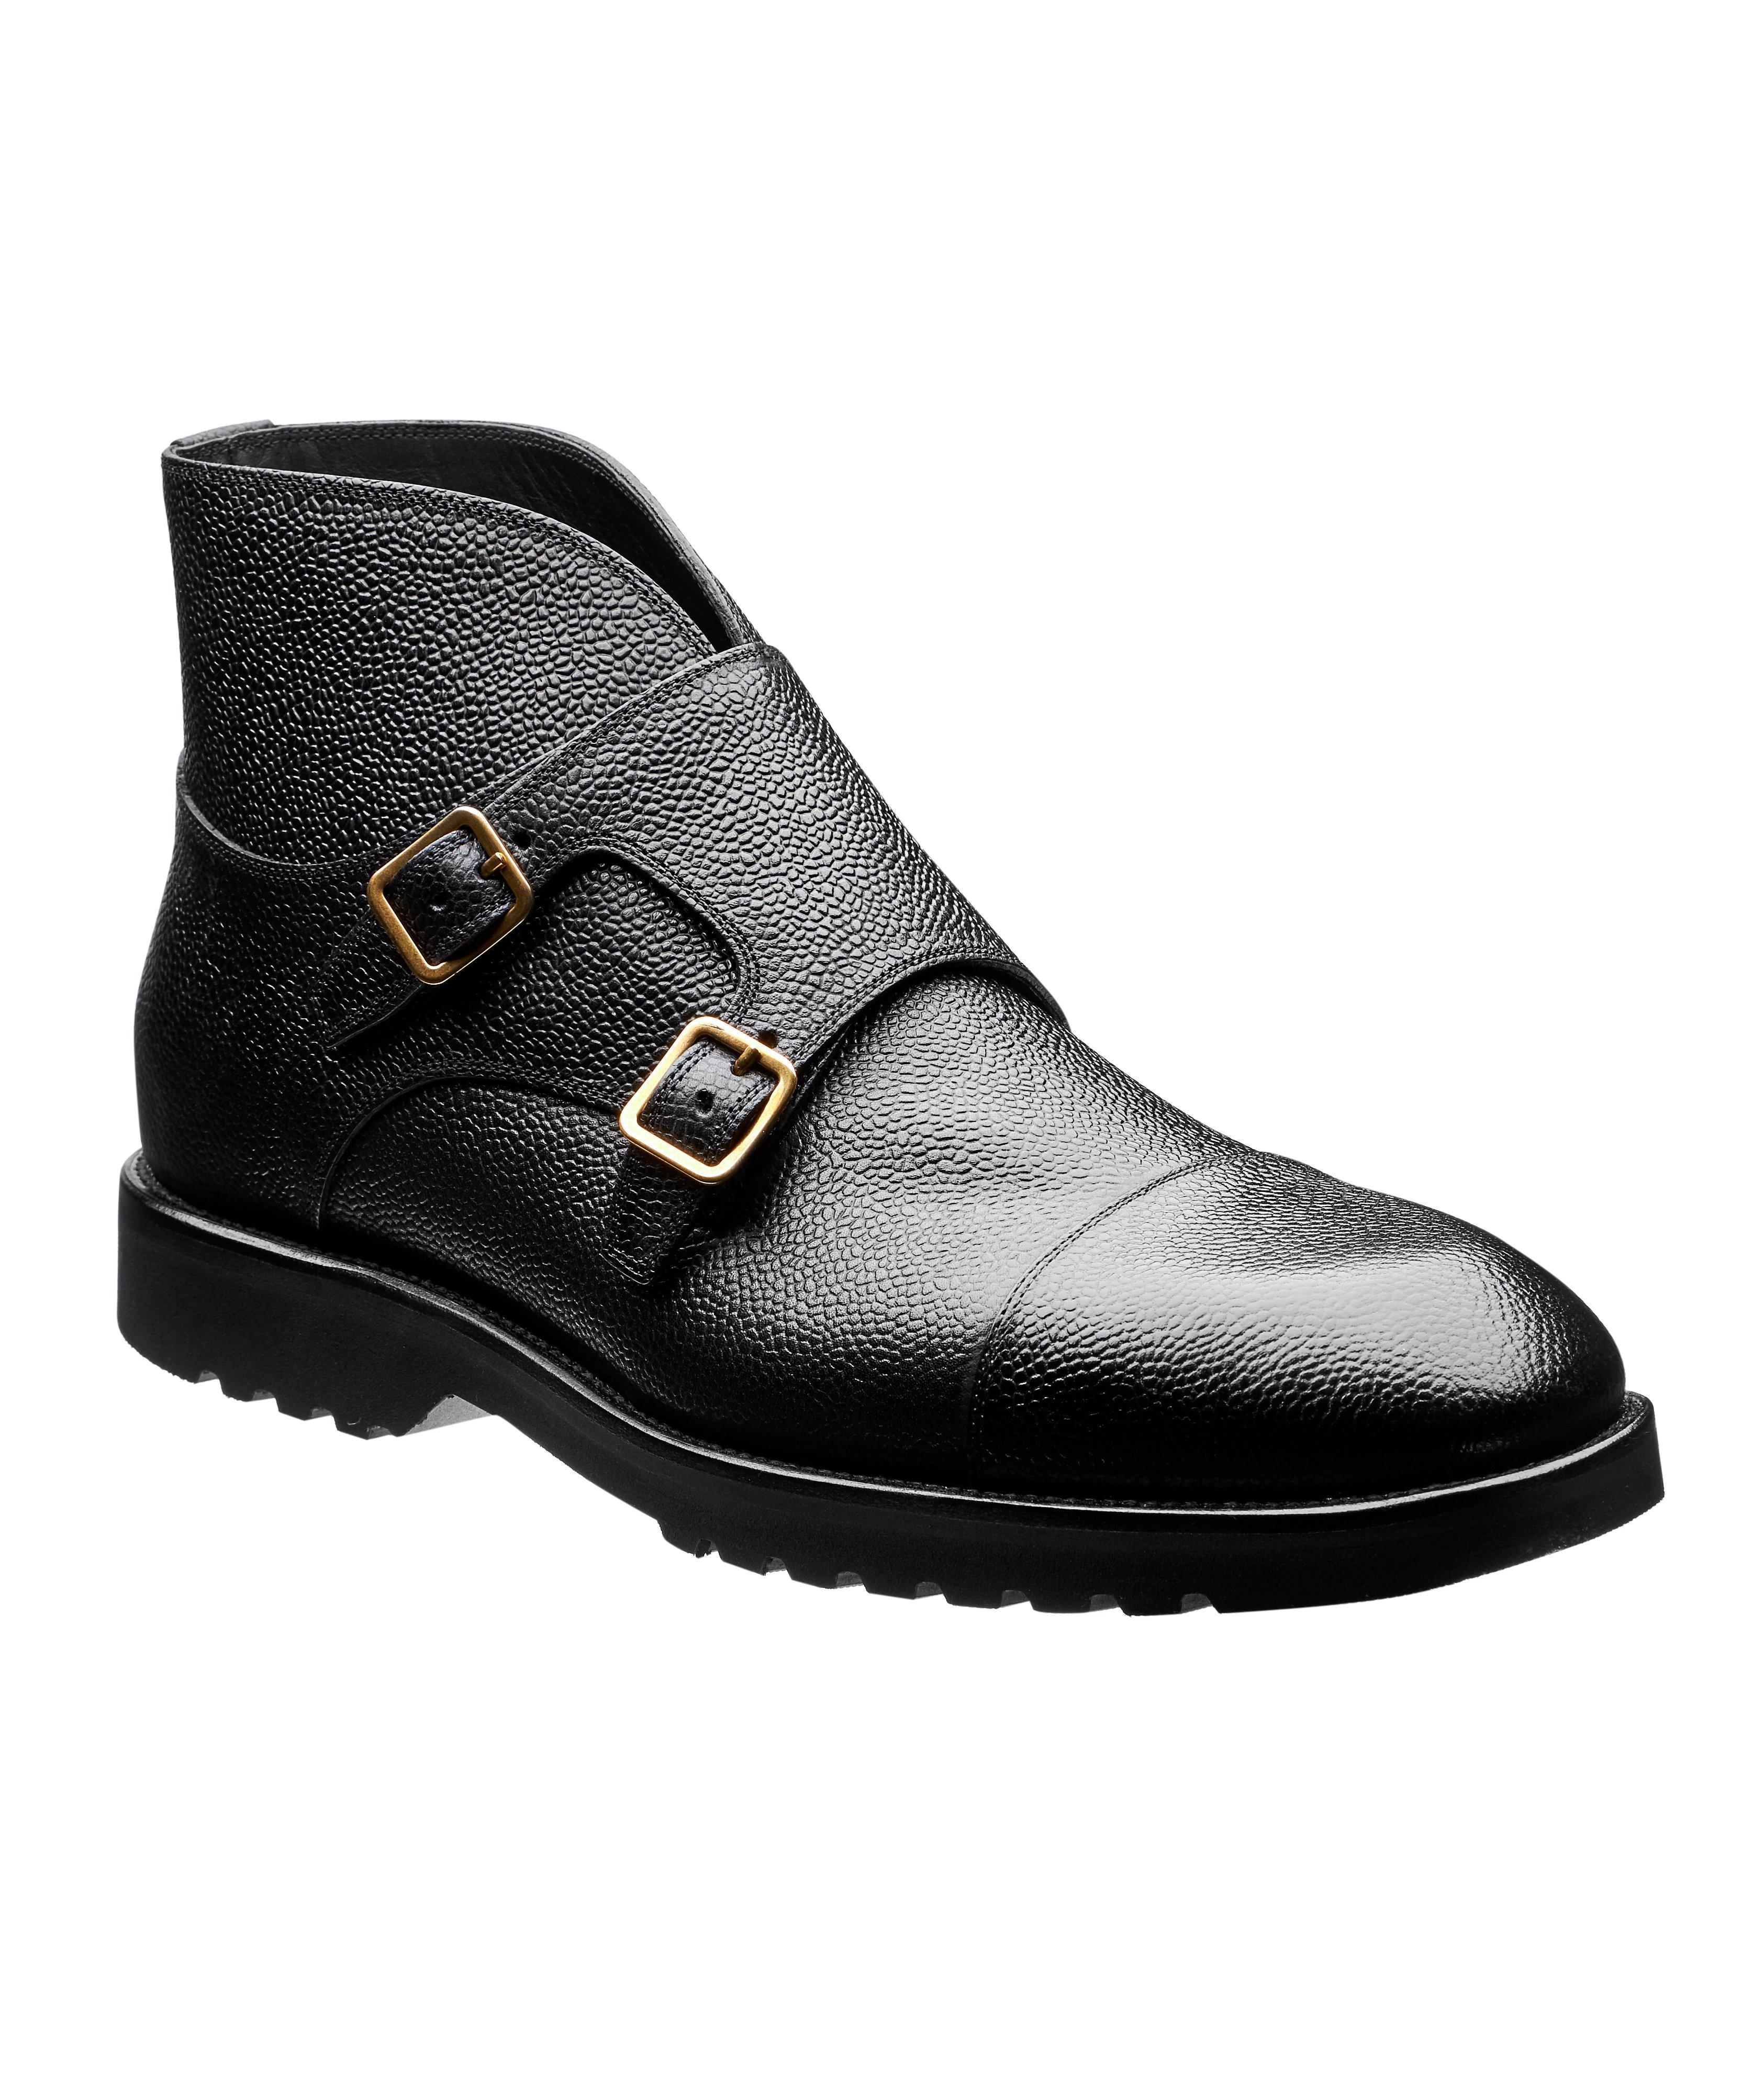 Leather Double-Monk Boots image 0